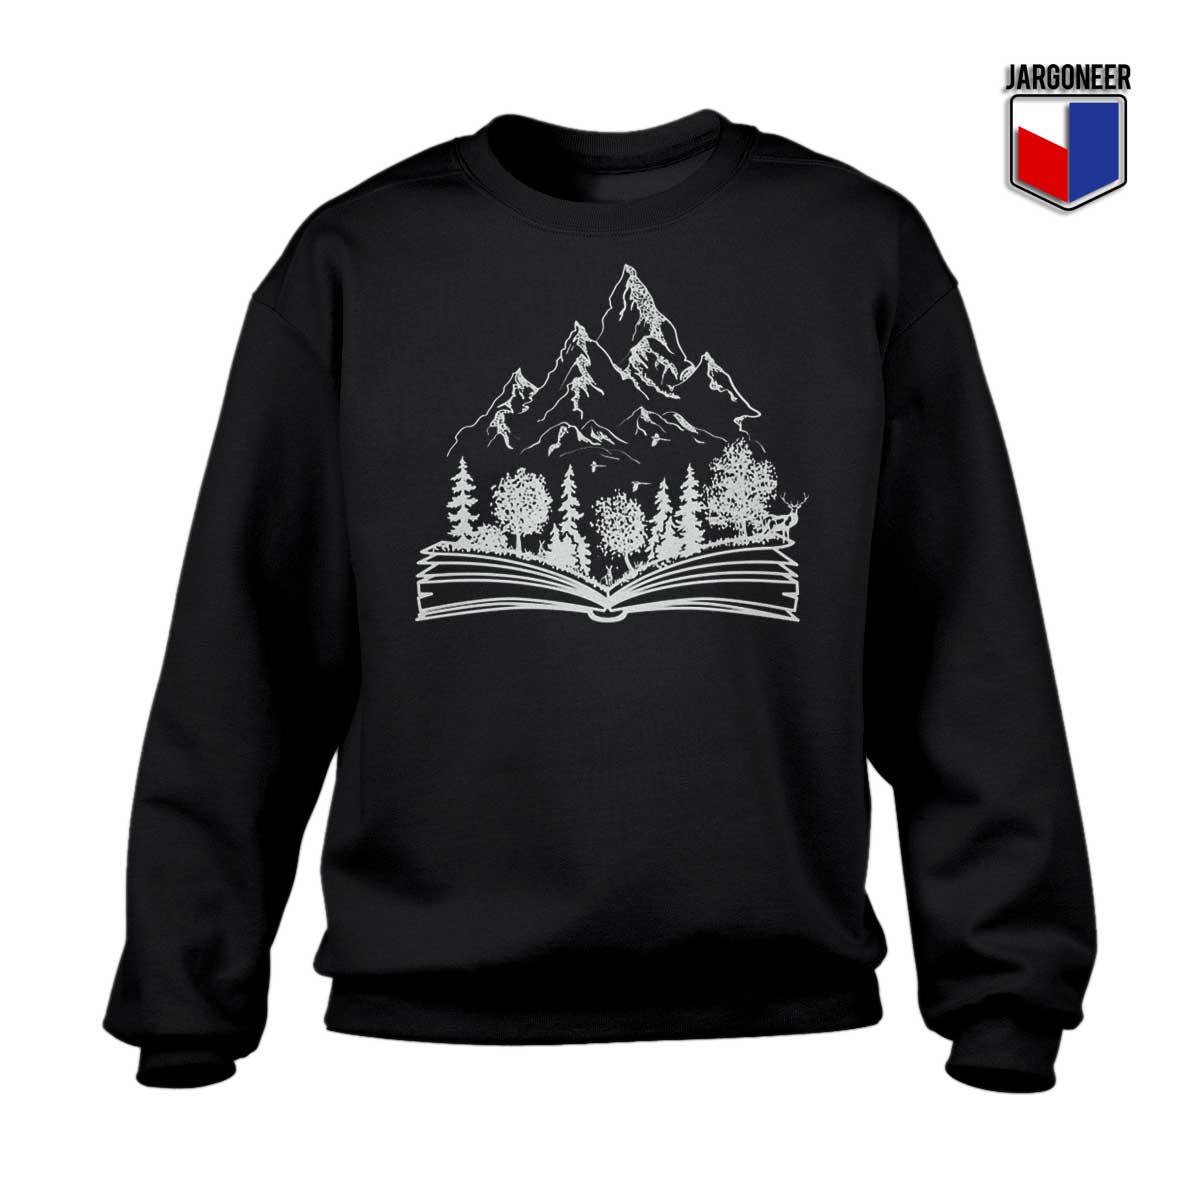 Open Book With Forest and Mountains Sweatshirt - Shop Unique Graphic Cool Shirt Designs